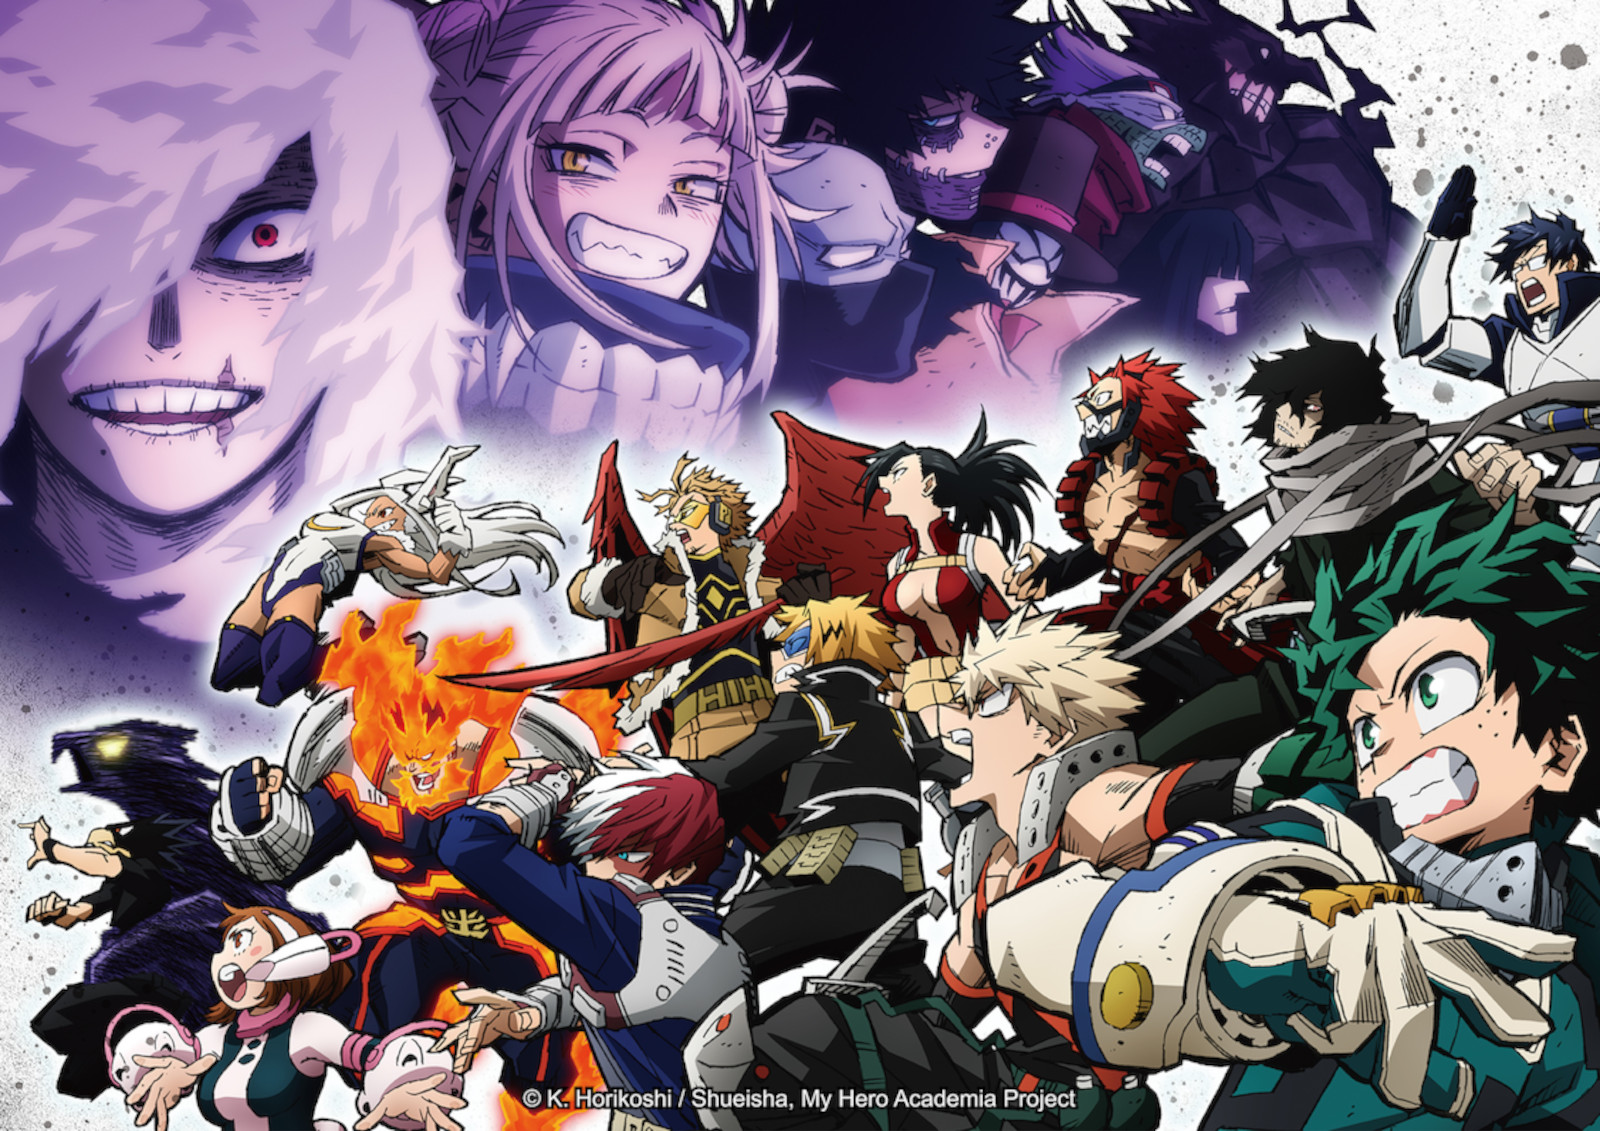 My Hero Academia: One's Justice Game Adds Himiko Toga, Dabi as Playable  Characters - News - Anime News Network